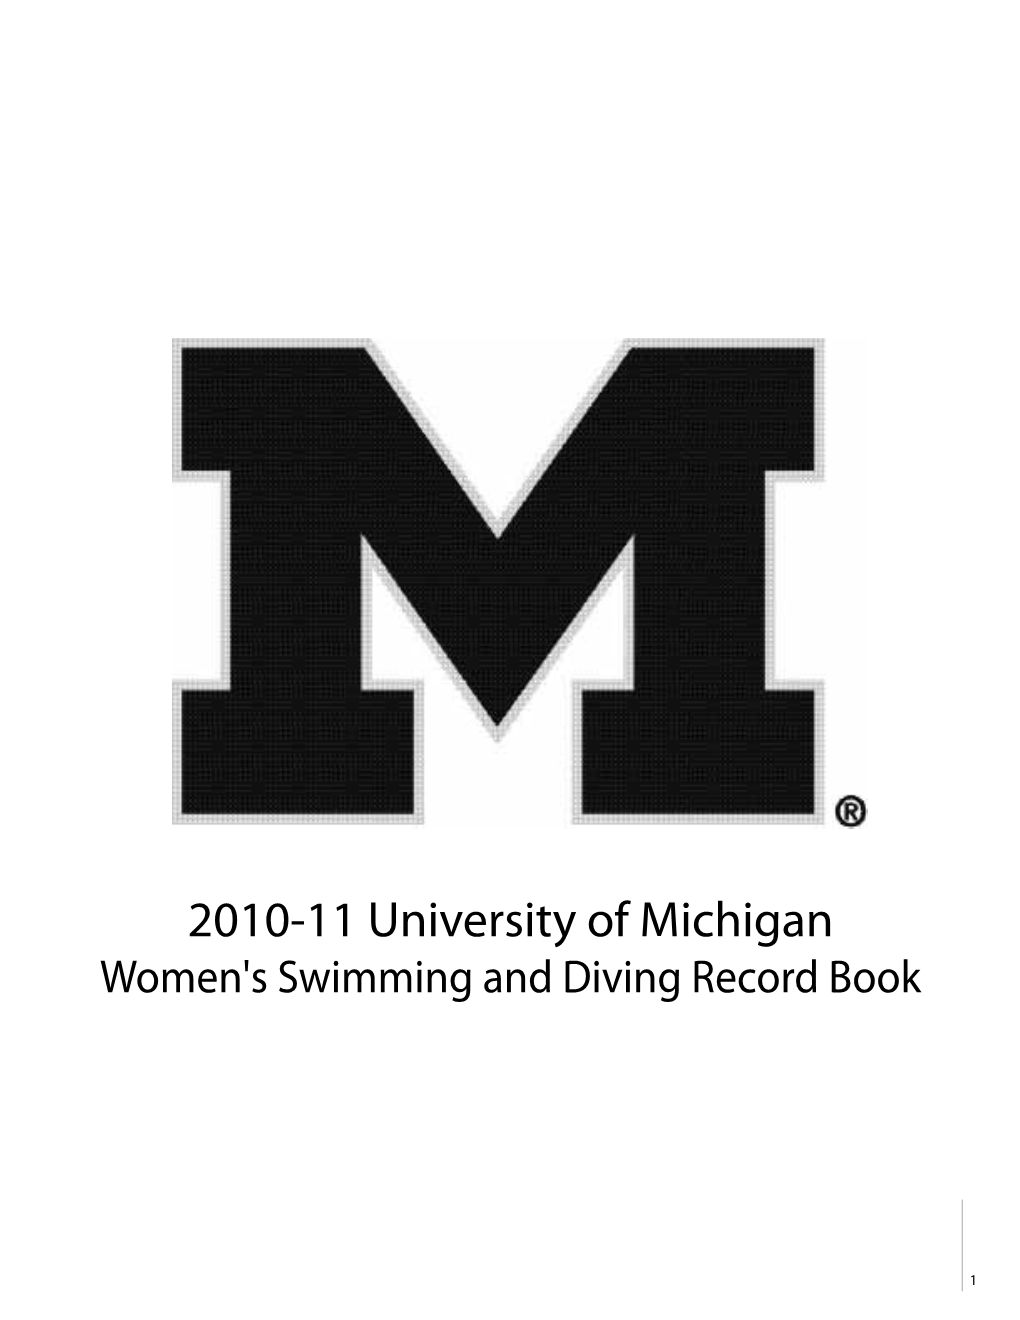 2010-11 University of Michigan Women's Swimming and Diving Record Book